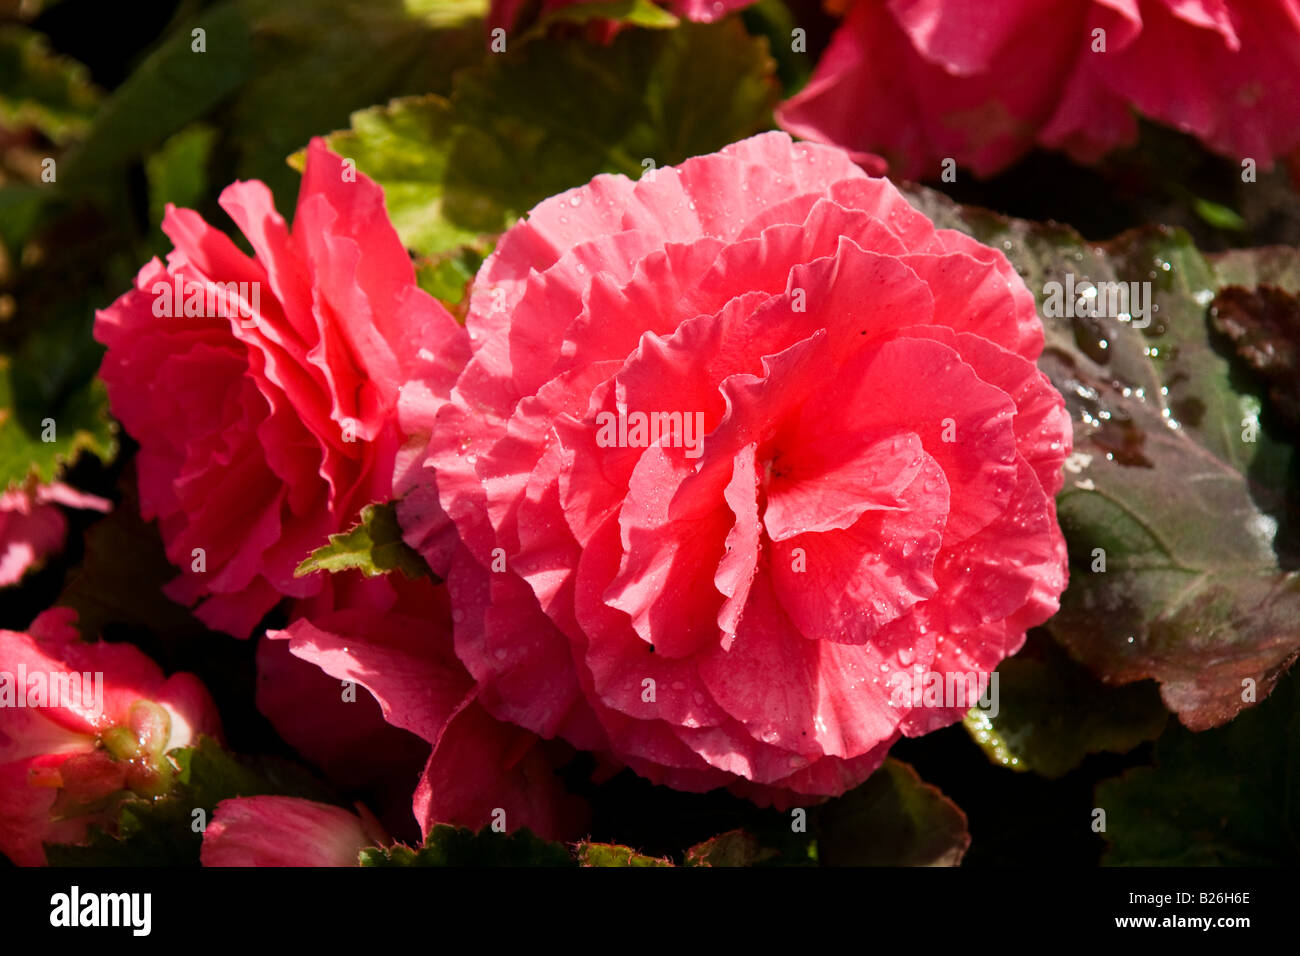 Red begonia flowers blooming Stock Photo